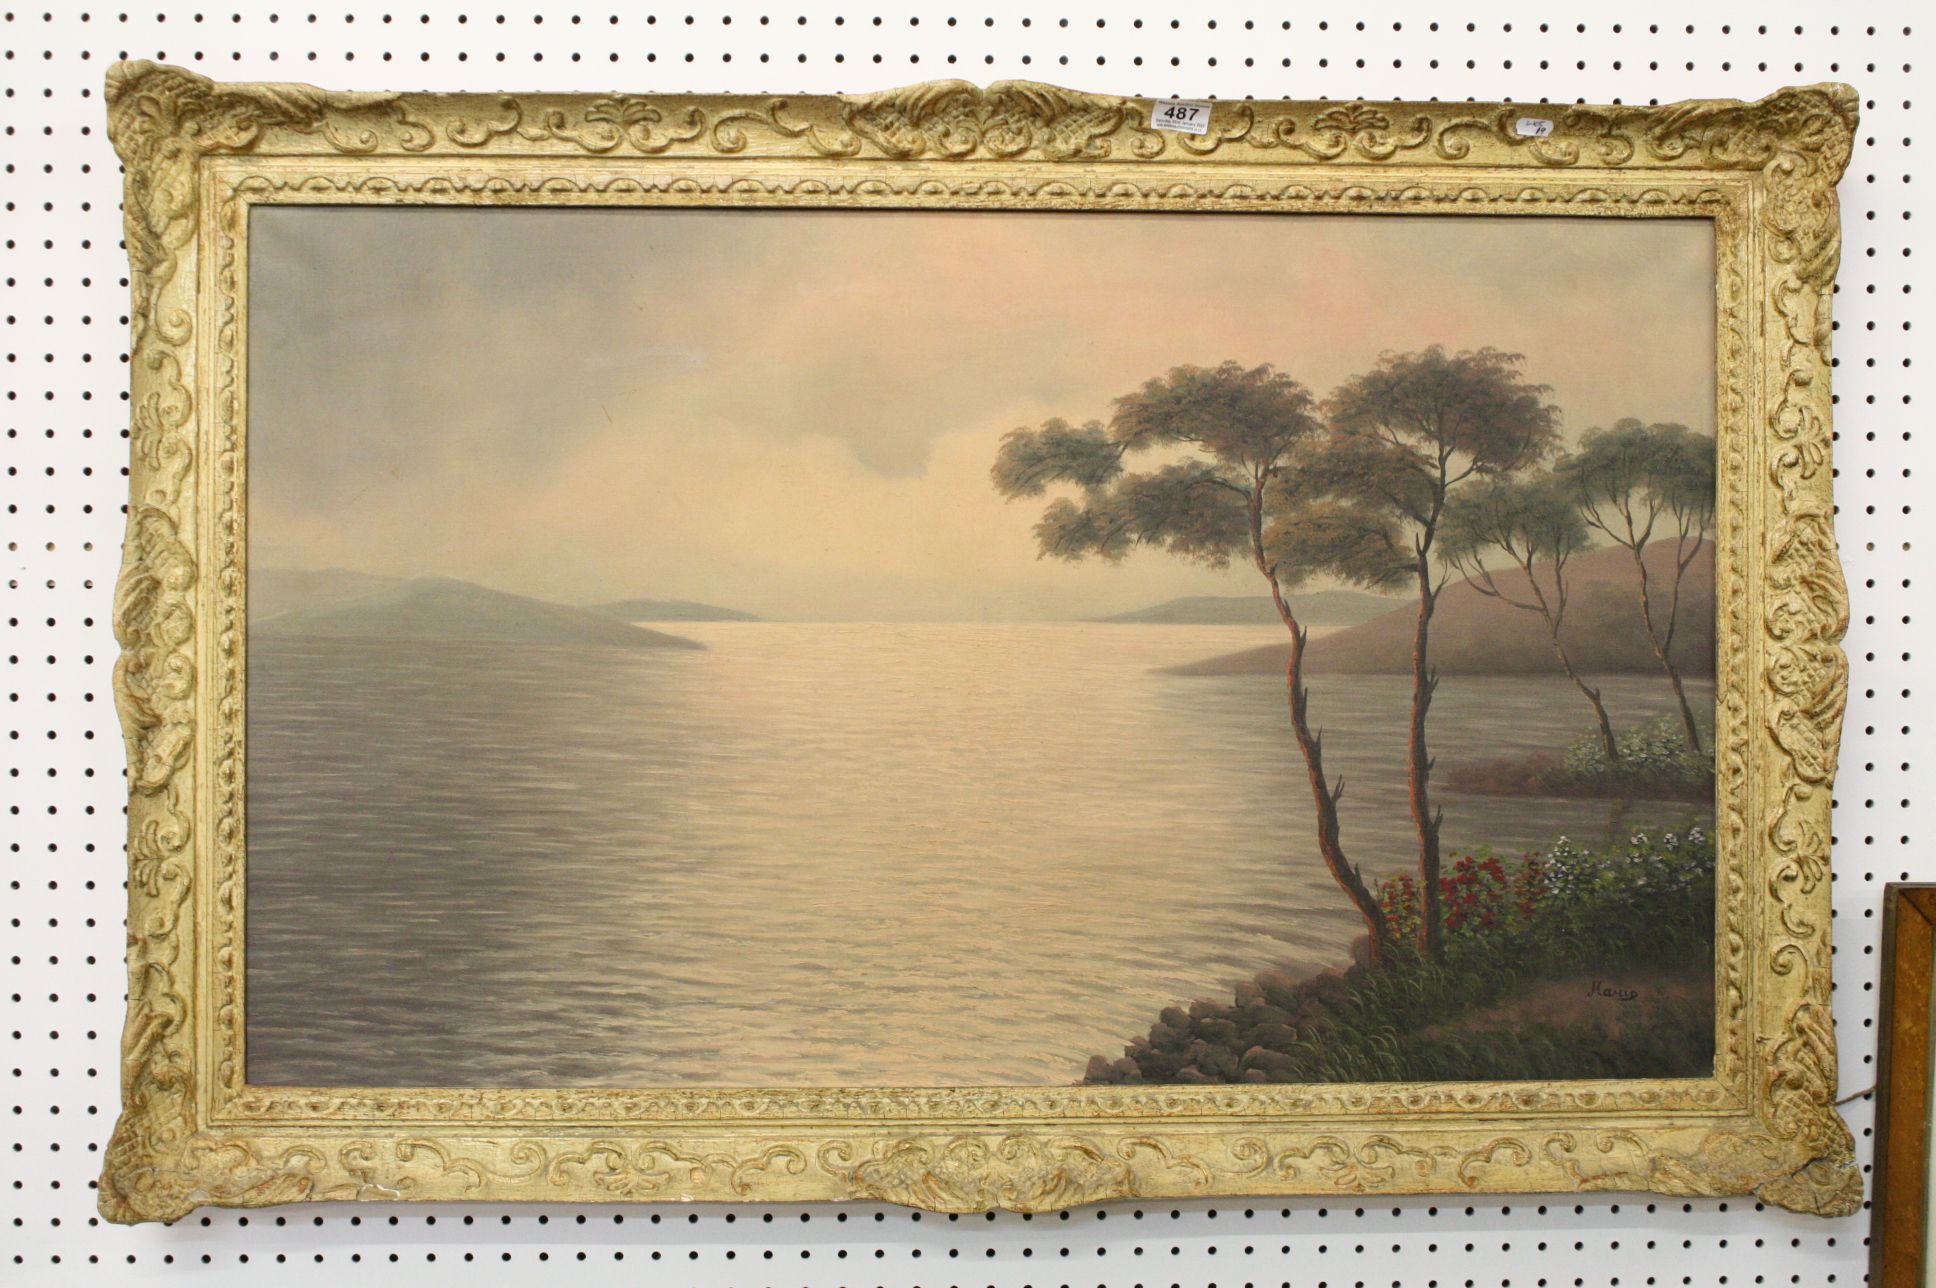 Oil on canvas, a large continental coastal scene in a swept frame, approx. 58cm x 99cm, Harrods